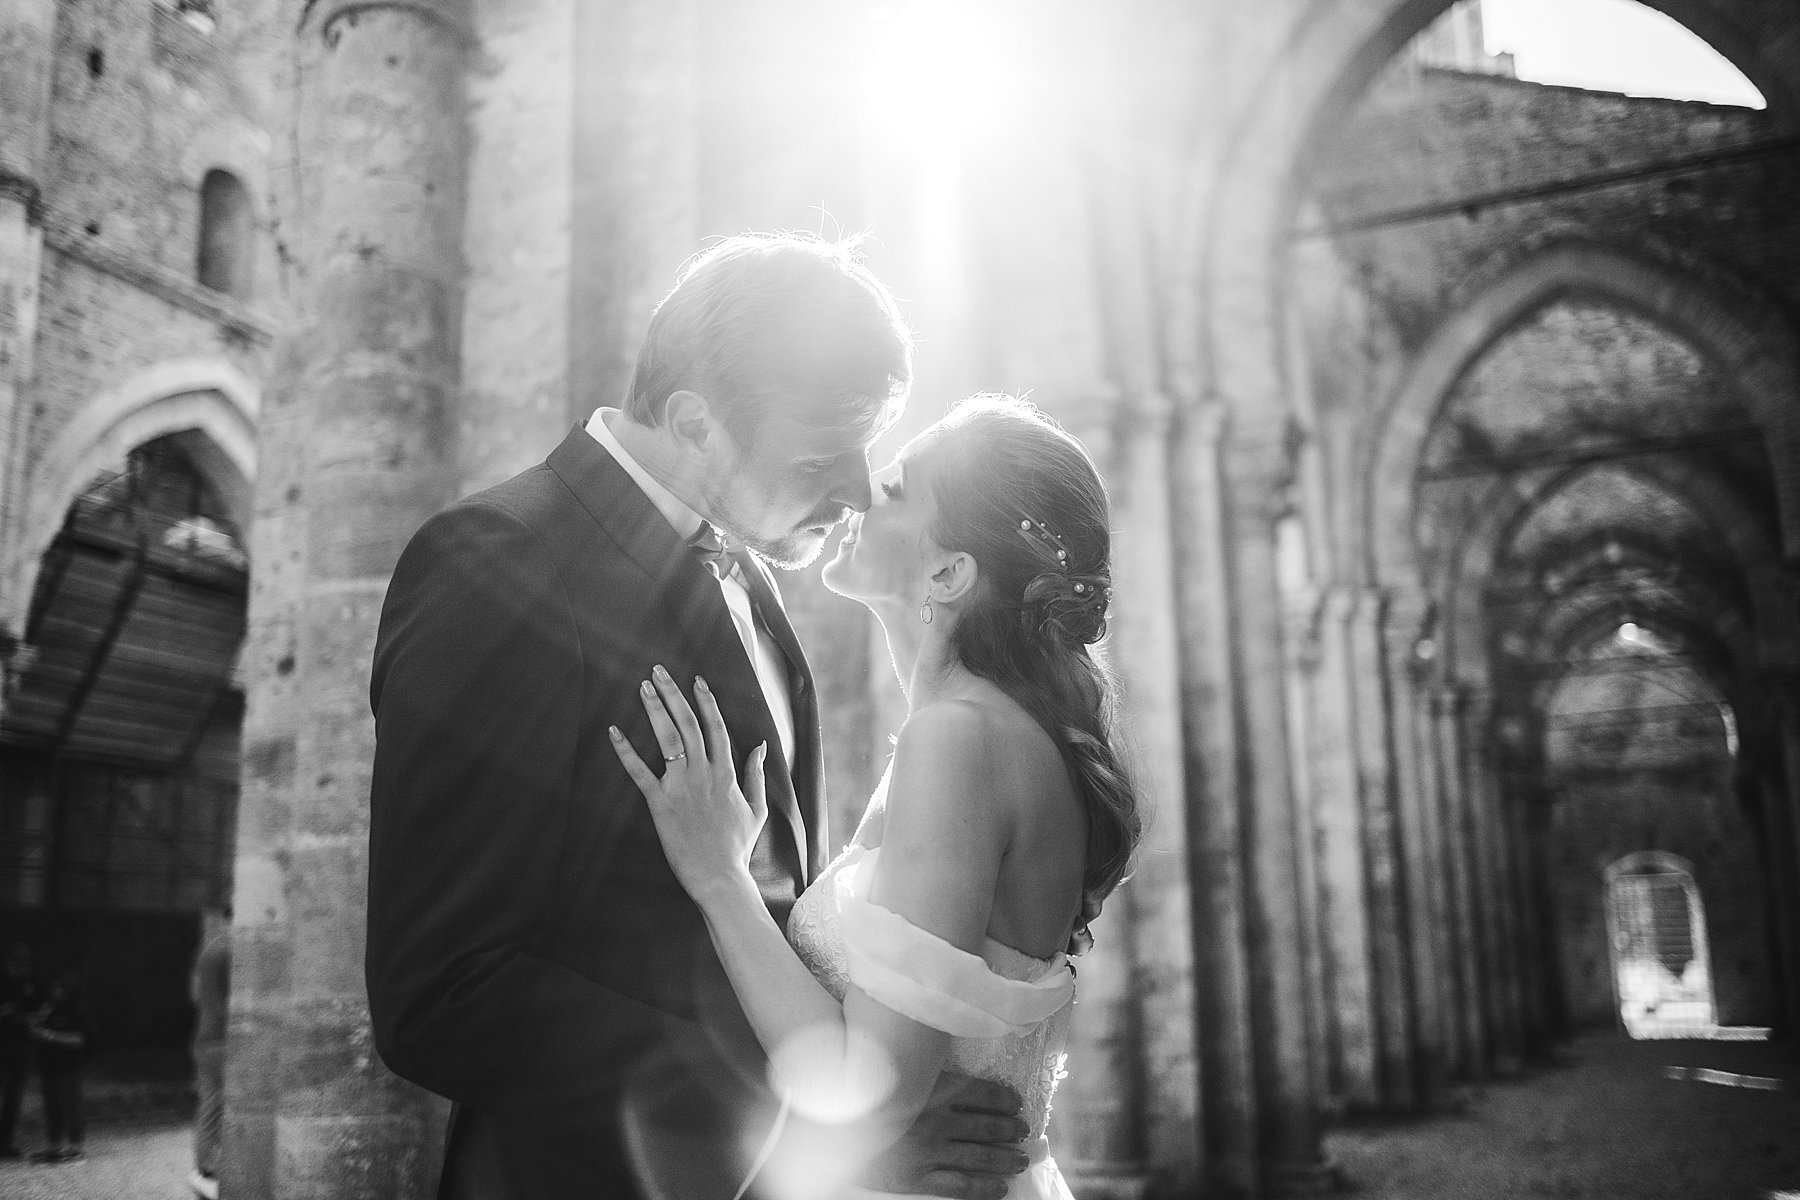 Romantic couple wedding portrait inside the gorgeous Roofless Abbey of San Galgano near Siena in the countryside of Tuscany